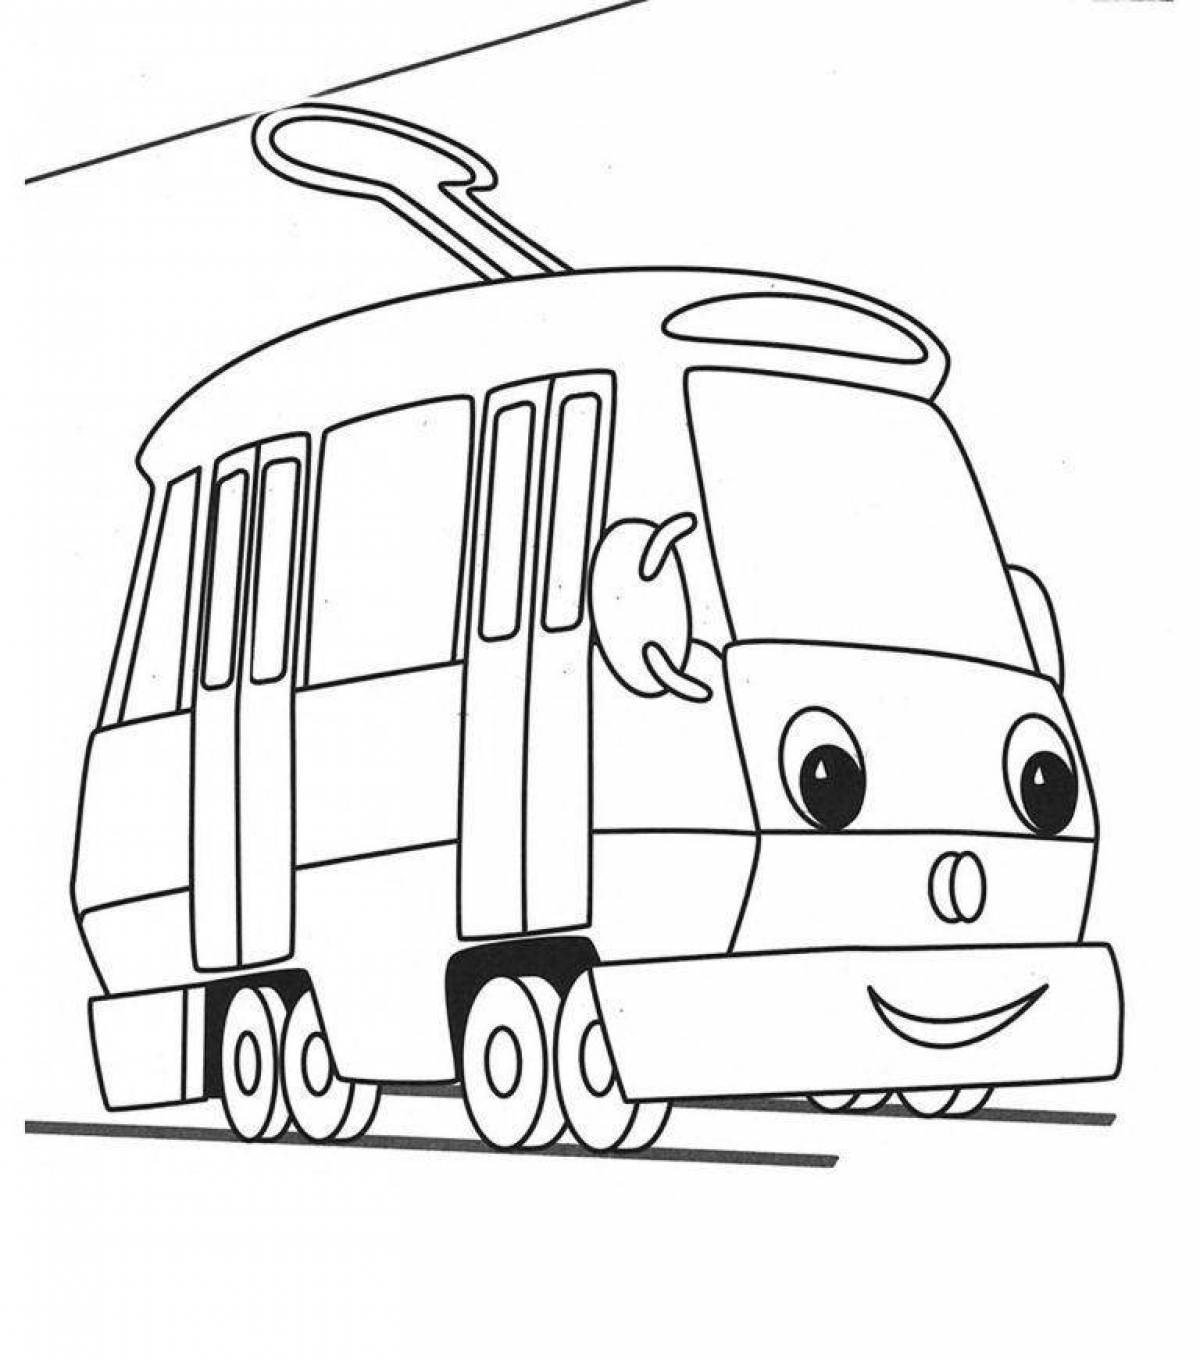 Incredible transport coloring book for 5-6 year olds